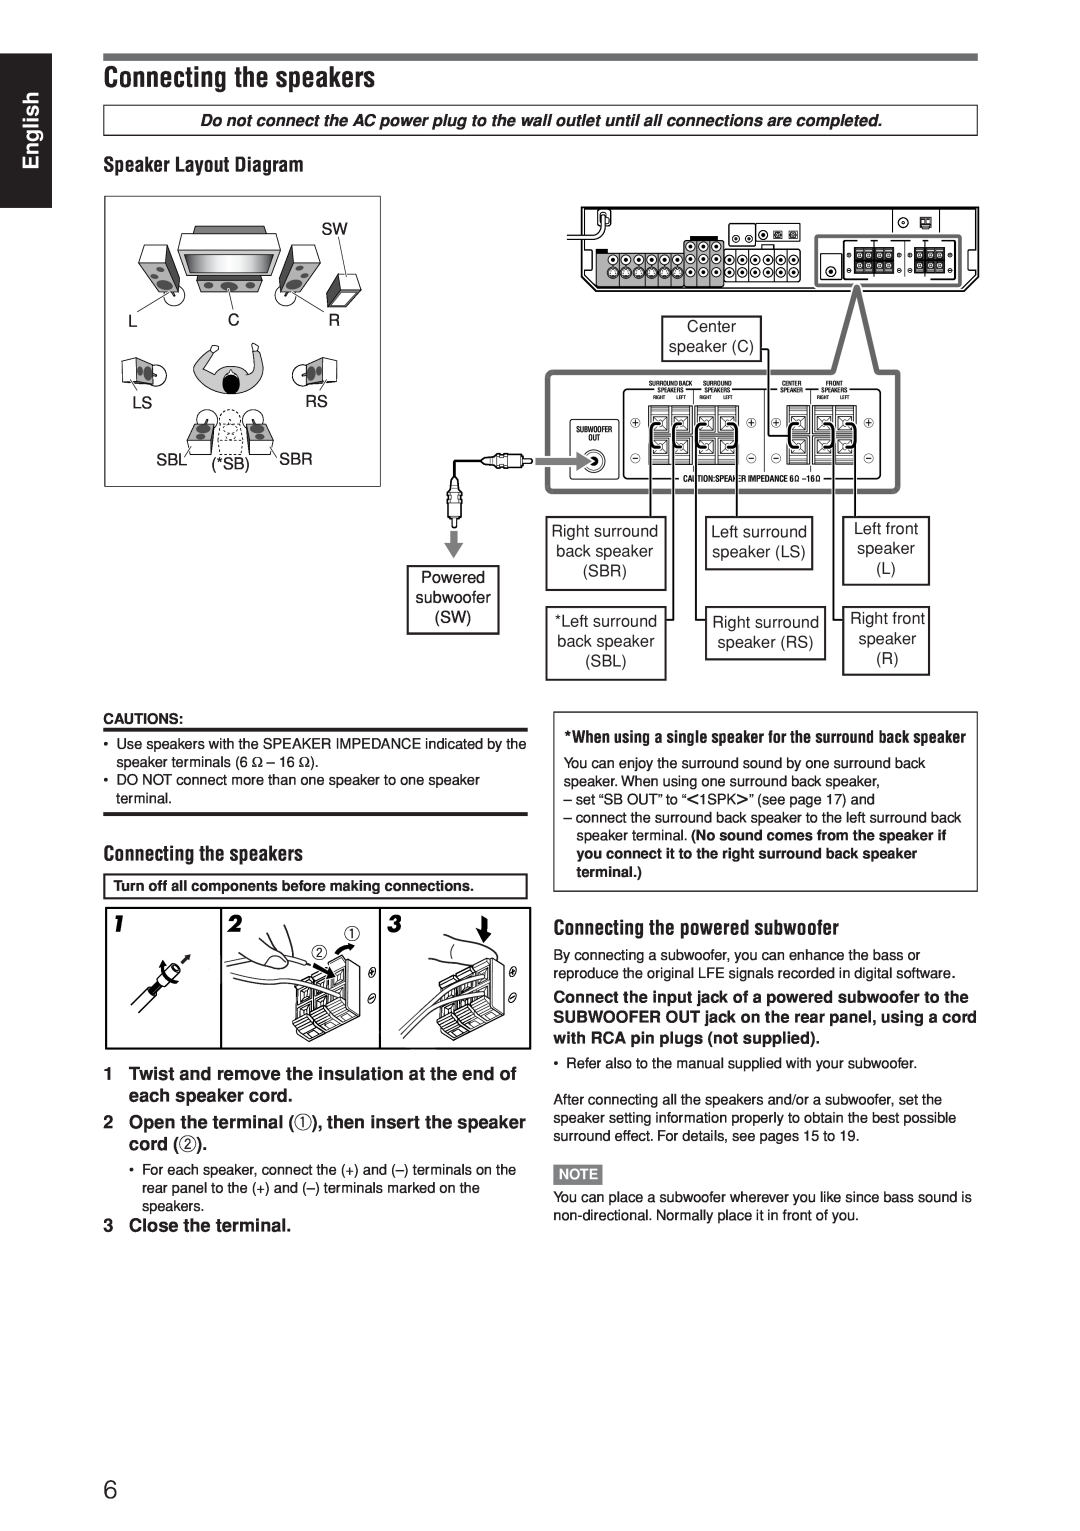 JVC RX-D205S, RX-D206B manual Connecting the speakers, English, Speaker Layout Diagram, Connecting the powered subwoofer 